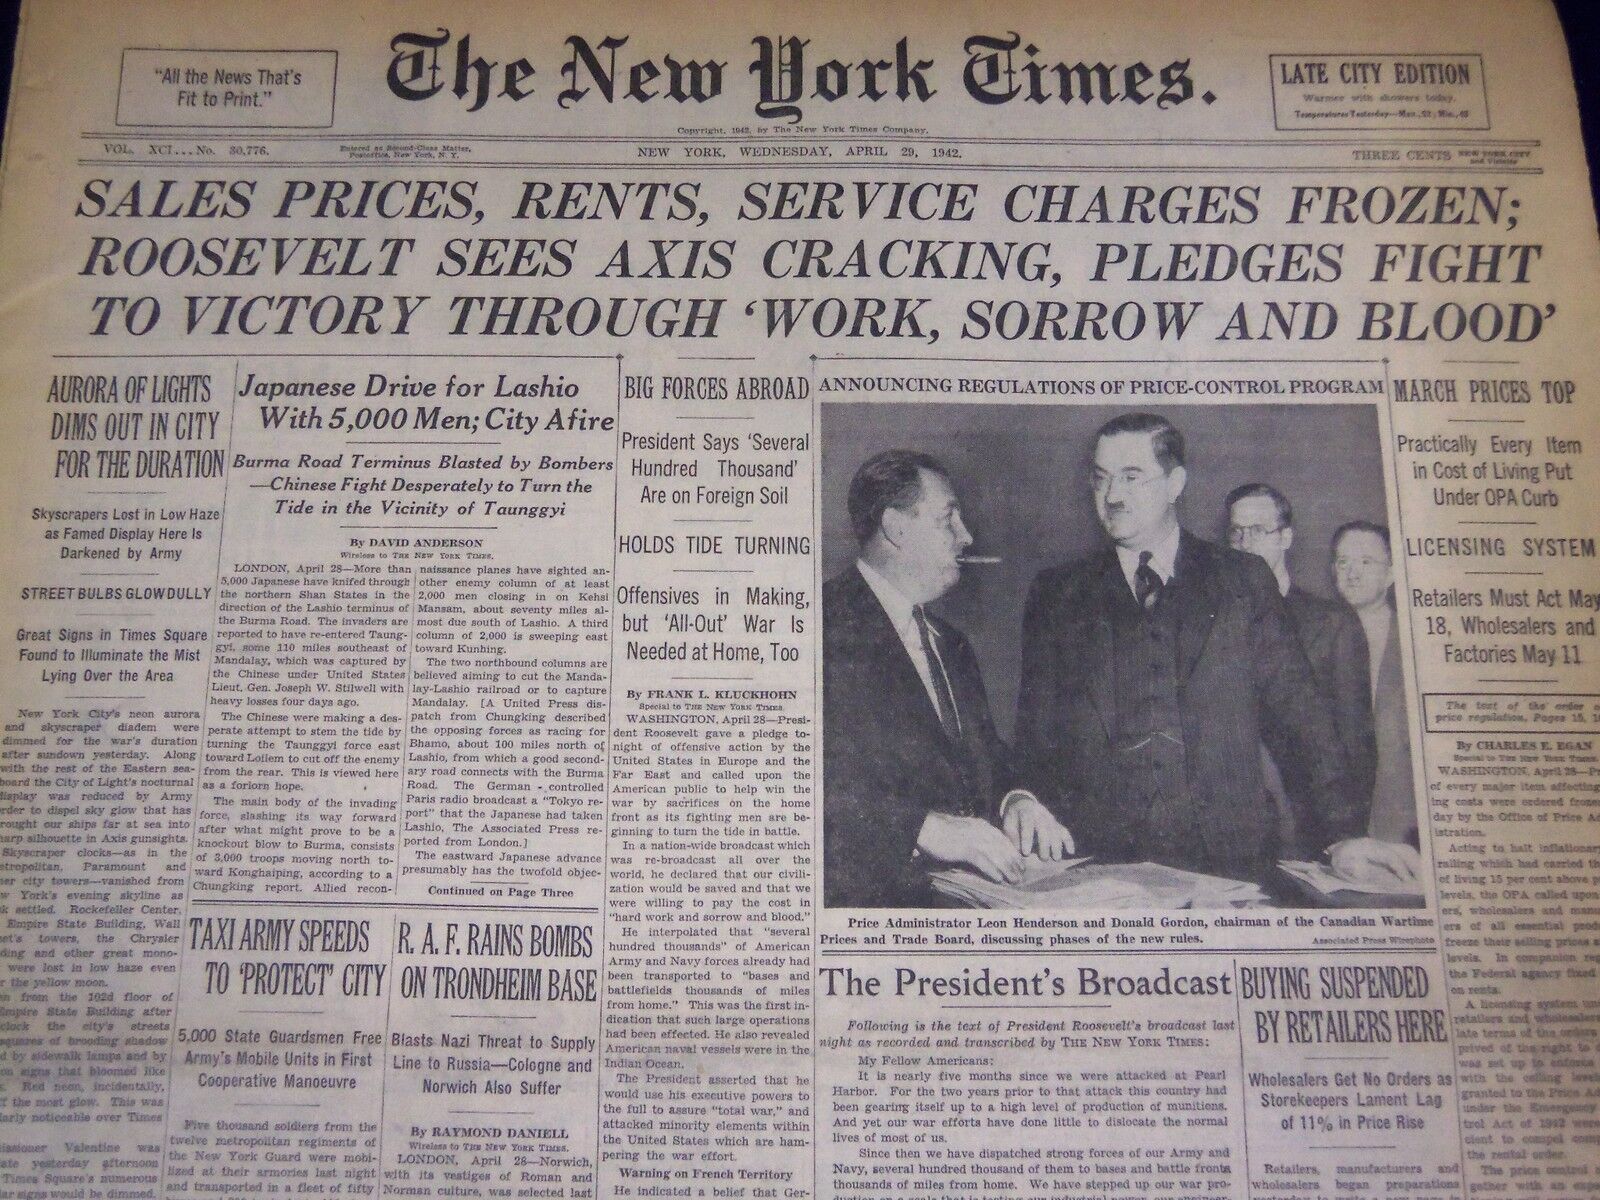 1942 APRIL 29 NEW YORK TIMES - ROOSEVELT SEES AXIS CRACKING - NT 1182